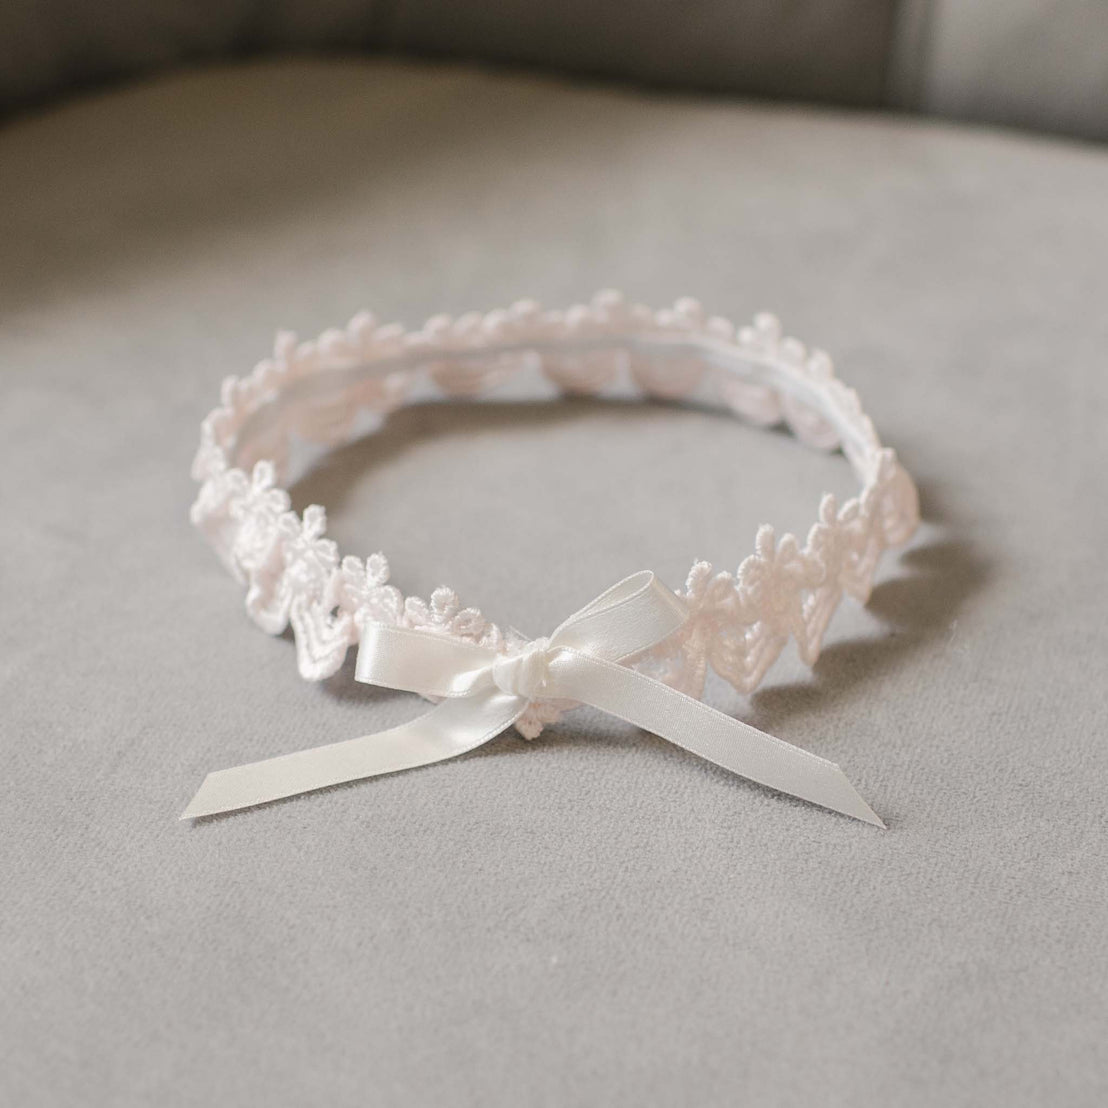 A delicate Baby Beau & Belle Joli Lace Headband adorned with a silk ribbon bow, displayed on a soft gray fabric background.